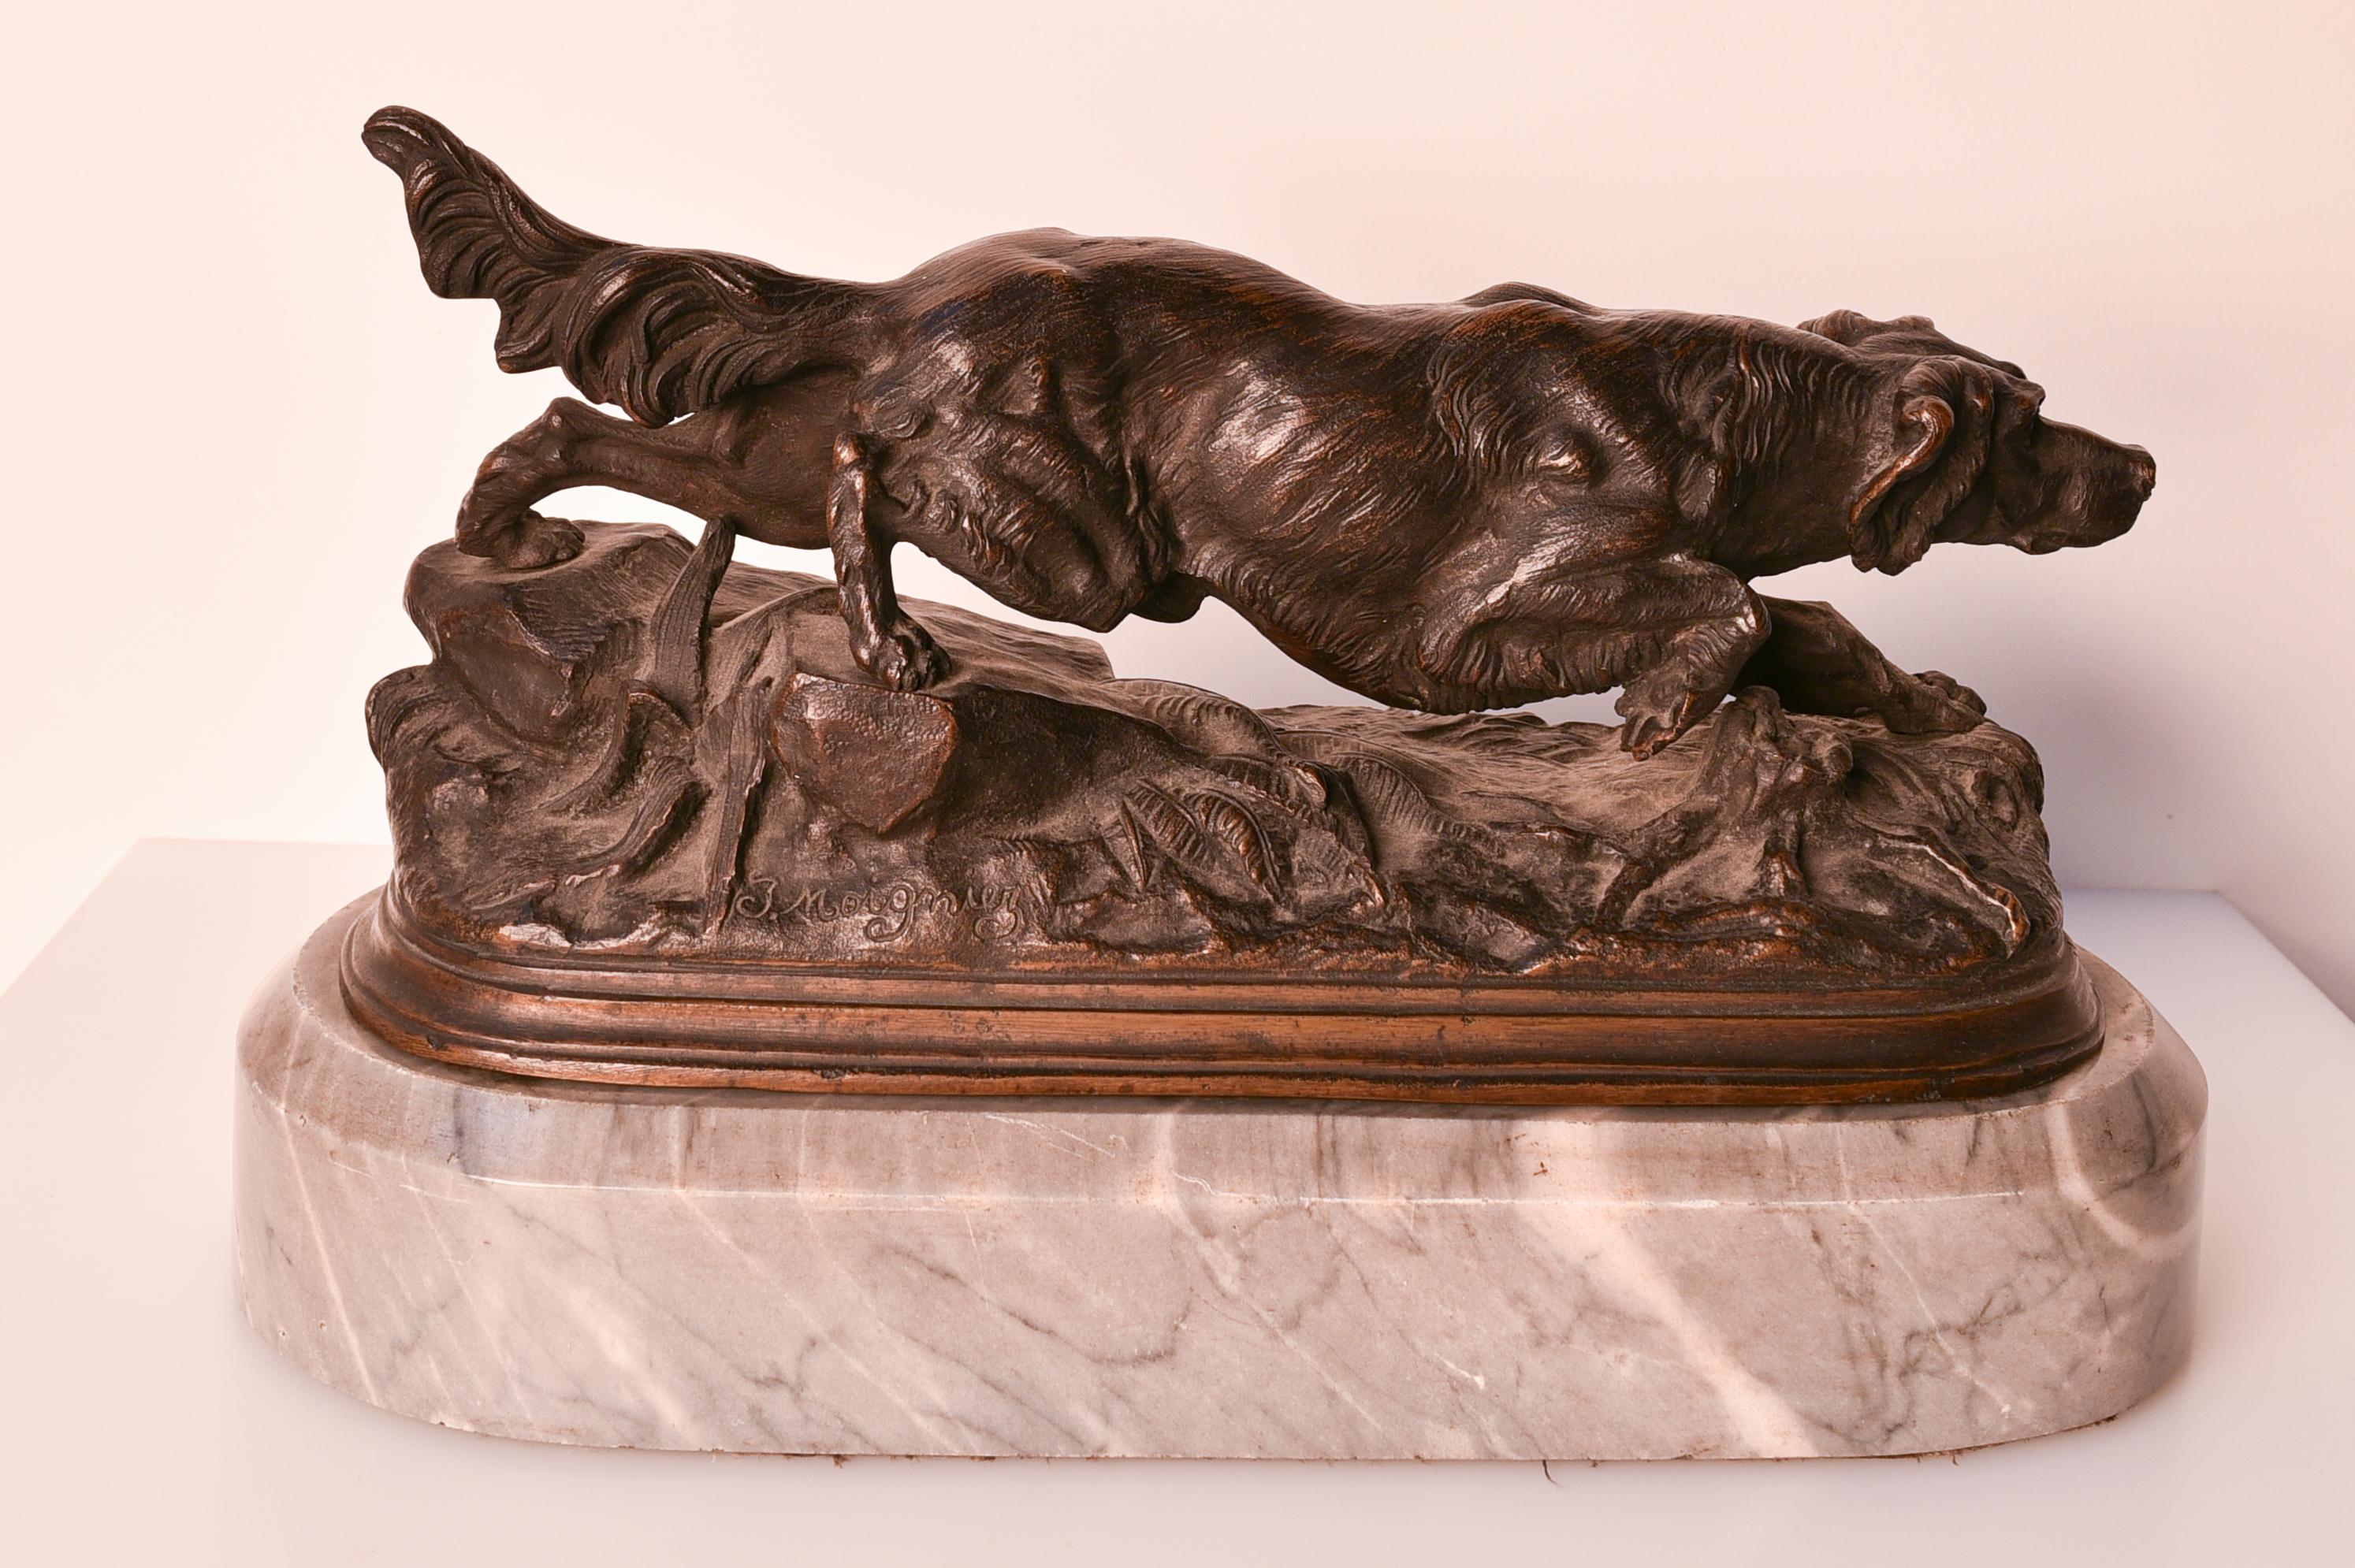 Jules Moigniez (1835 – 1894) was a French animalier sculptor who was best known for his bronzes depicting birds, horses and dogs. This sculpture is an Irish setter dog, which was put on a grey, marble socle. 